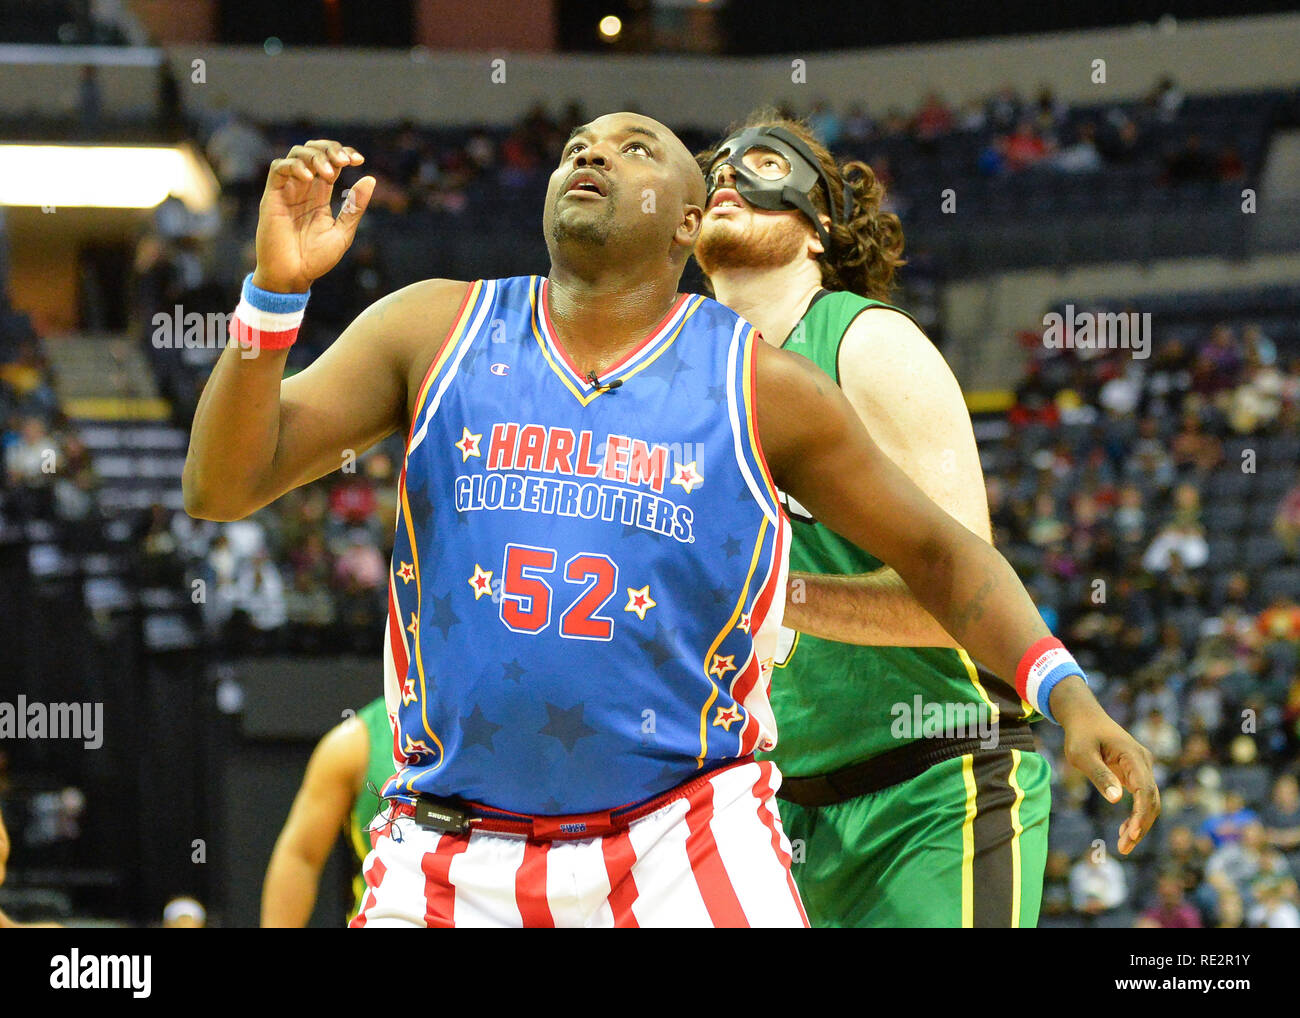 Memphis, TN, USA. 18th Jan, 2019. Harlem Globetrotters, Big Easy (52), and Washington Generals forward, Cage (0), during the exhibition game against the Washington Generals at Fed Ex Forum in Memphis, TN. Kevin Langley/Sports South Media/CSM/Alamy Live News Credit: Cal Sport Media/Alamy Live News Stock Photo